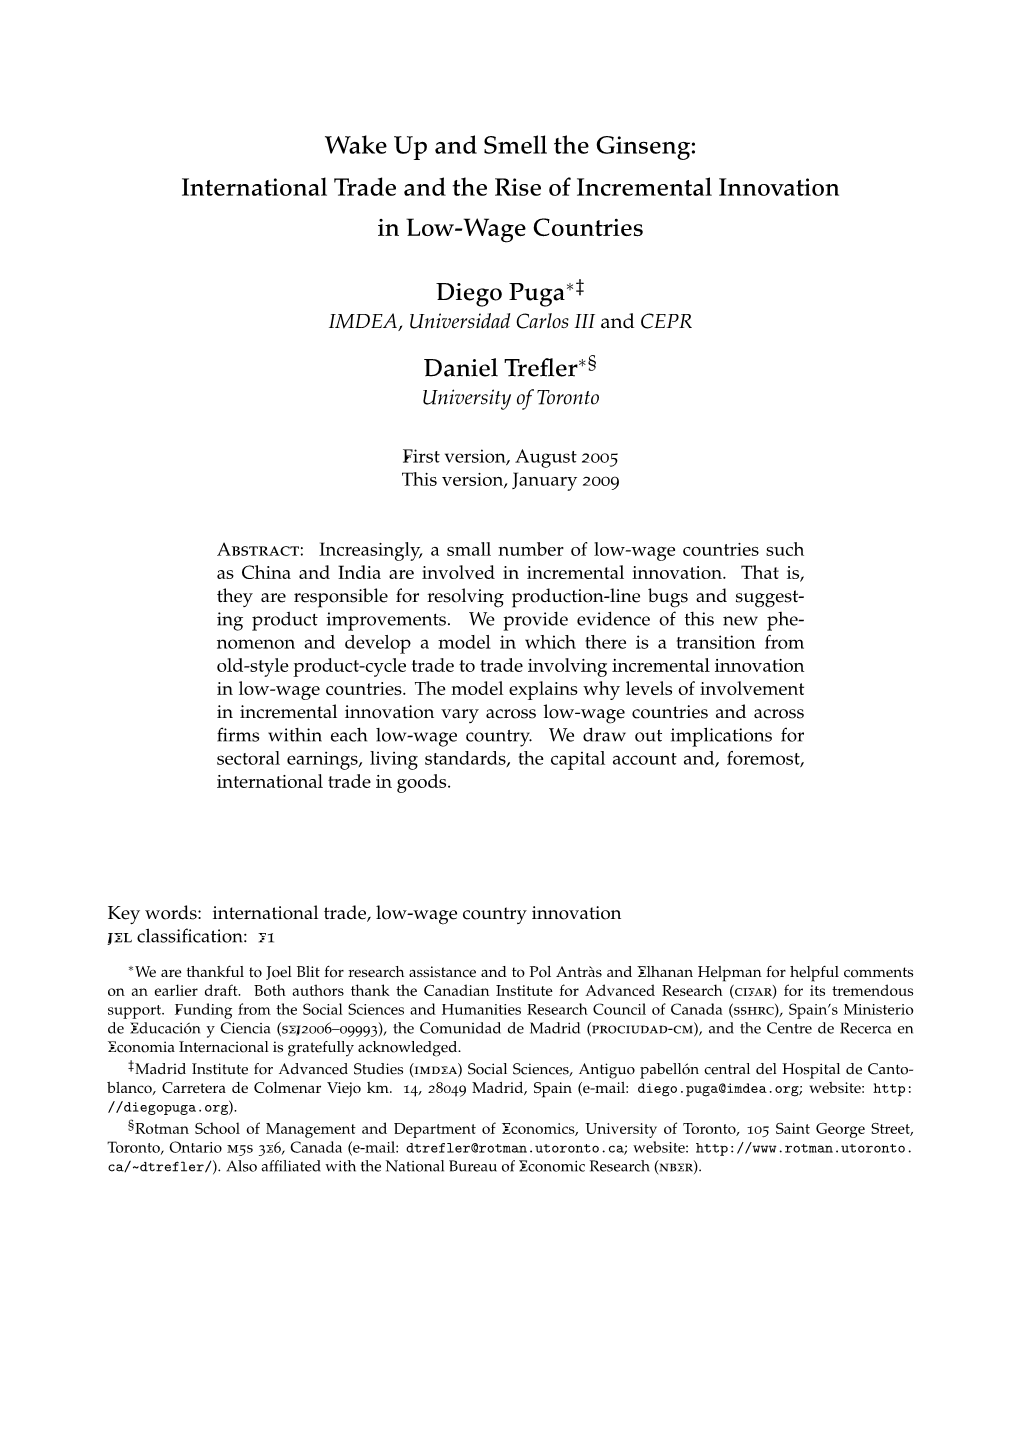 International Trade and the Rise of Incremental Innovation in Low-Wage Countries